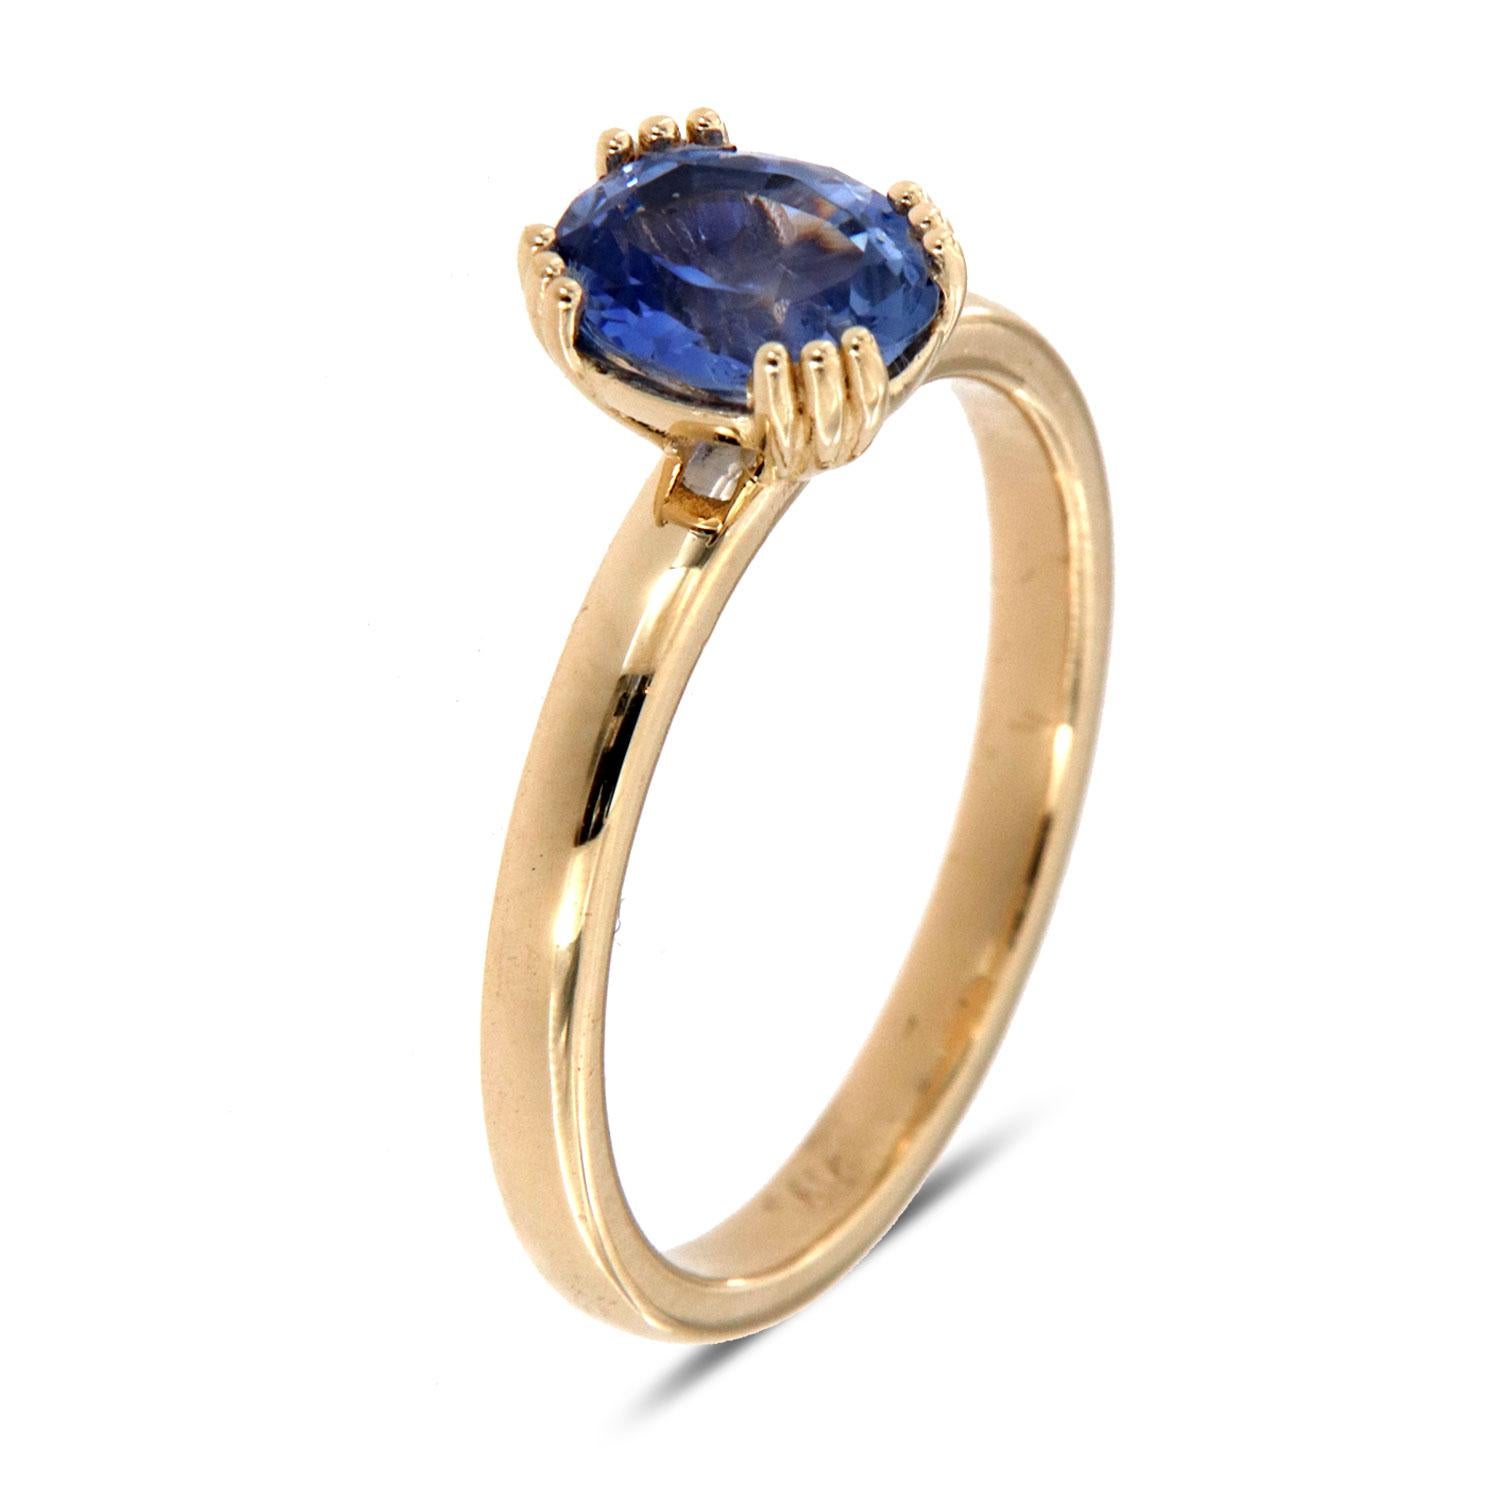 This delicate handcrafted earthy, organically designed ring features a 1.09 Carat Natural Non-Heated Sri-Lanka Sapphire 